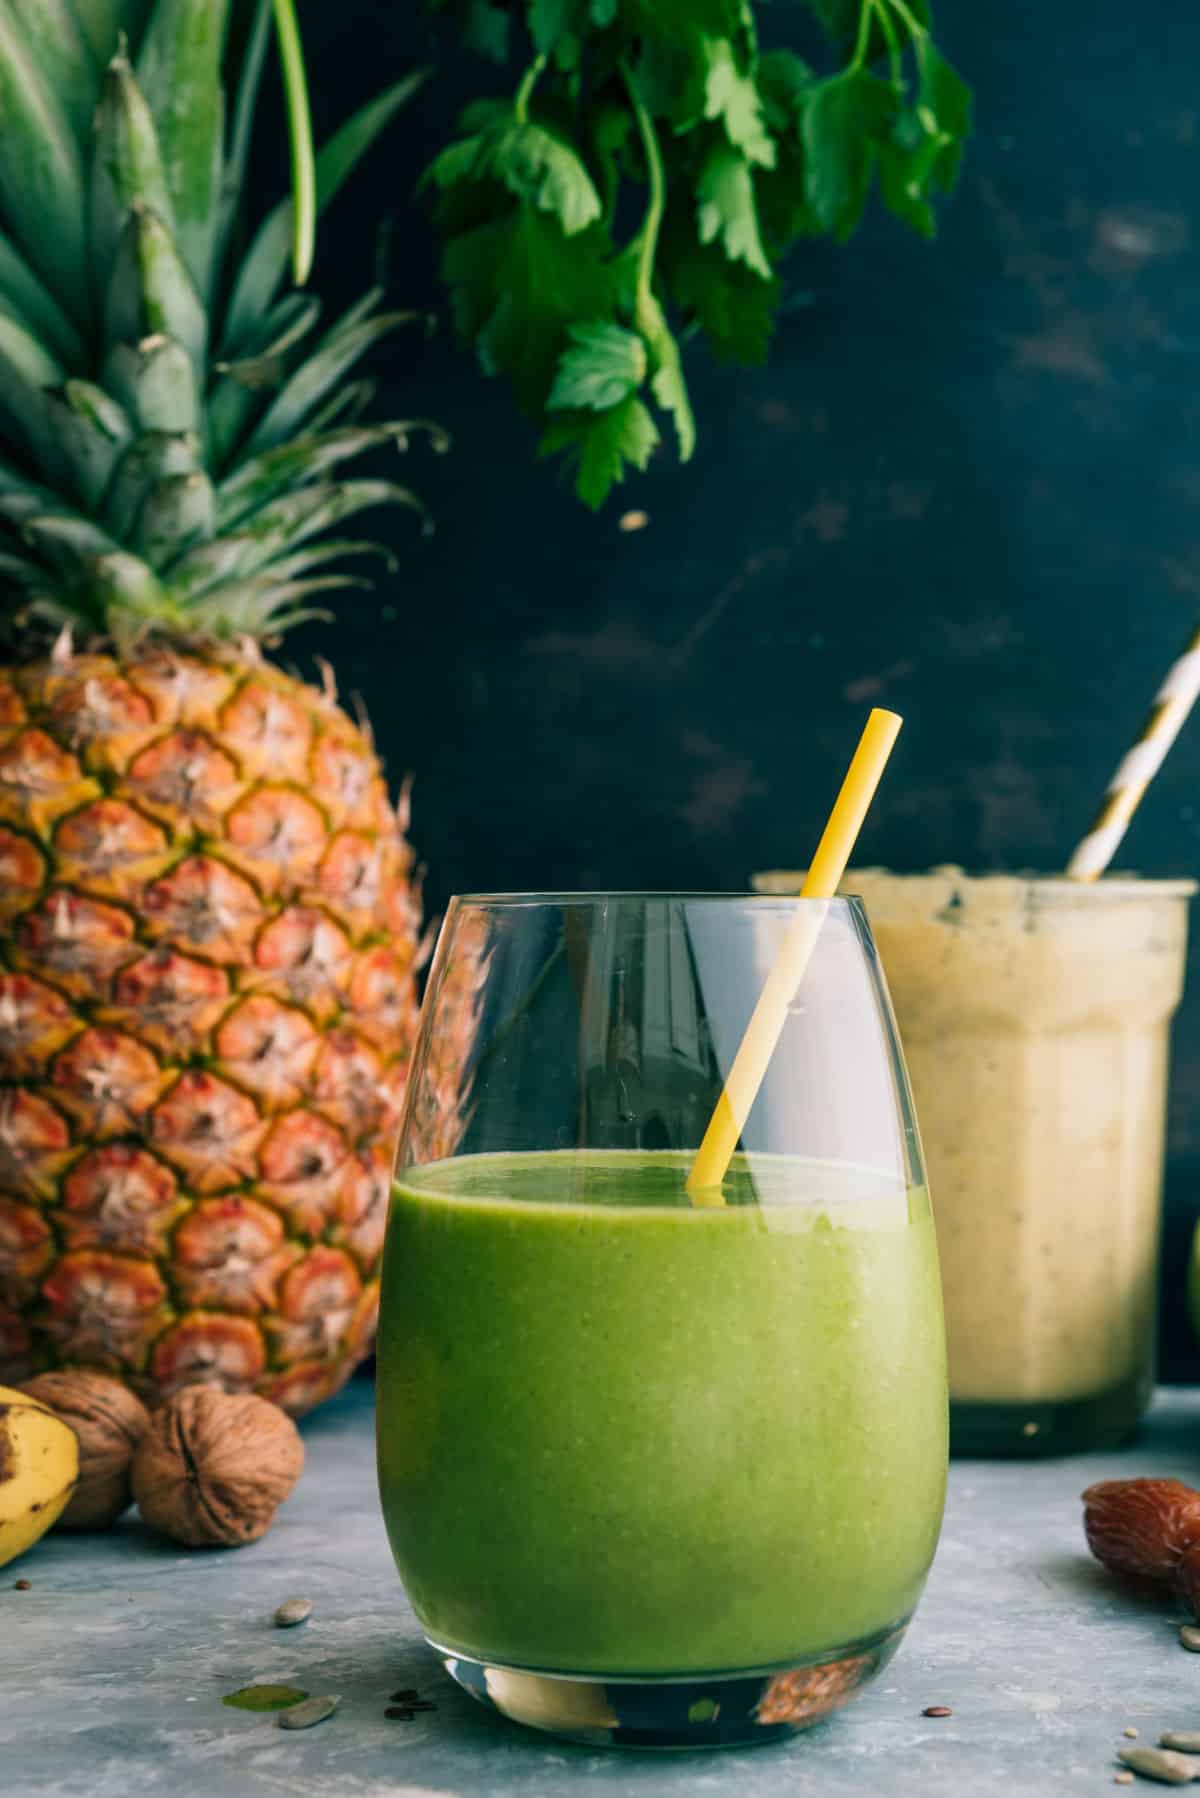 Avocado smoothie and pineapple banana smoothie with straws and pineapple.